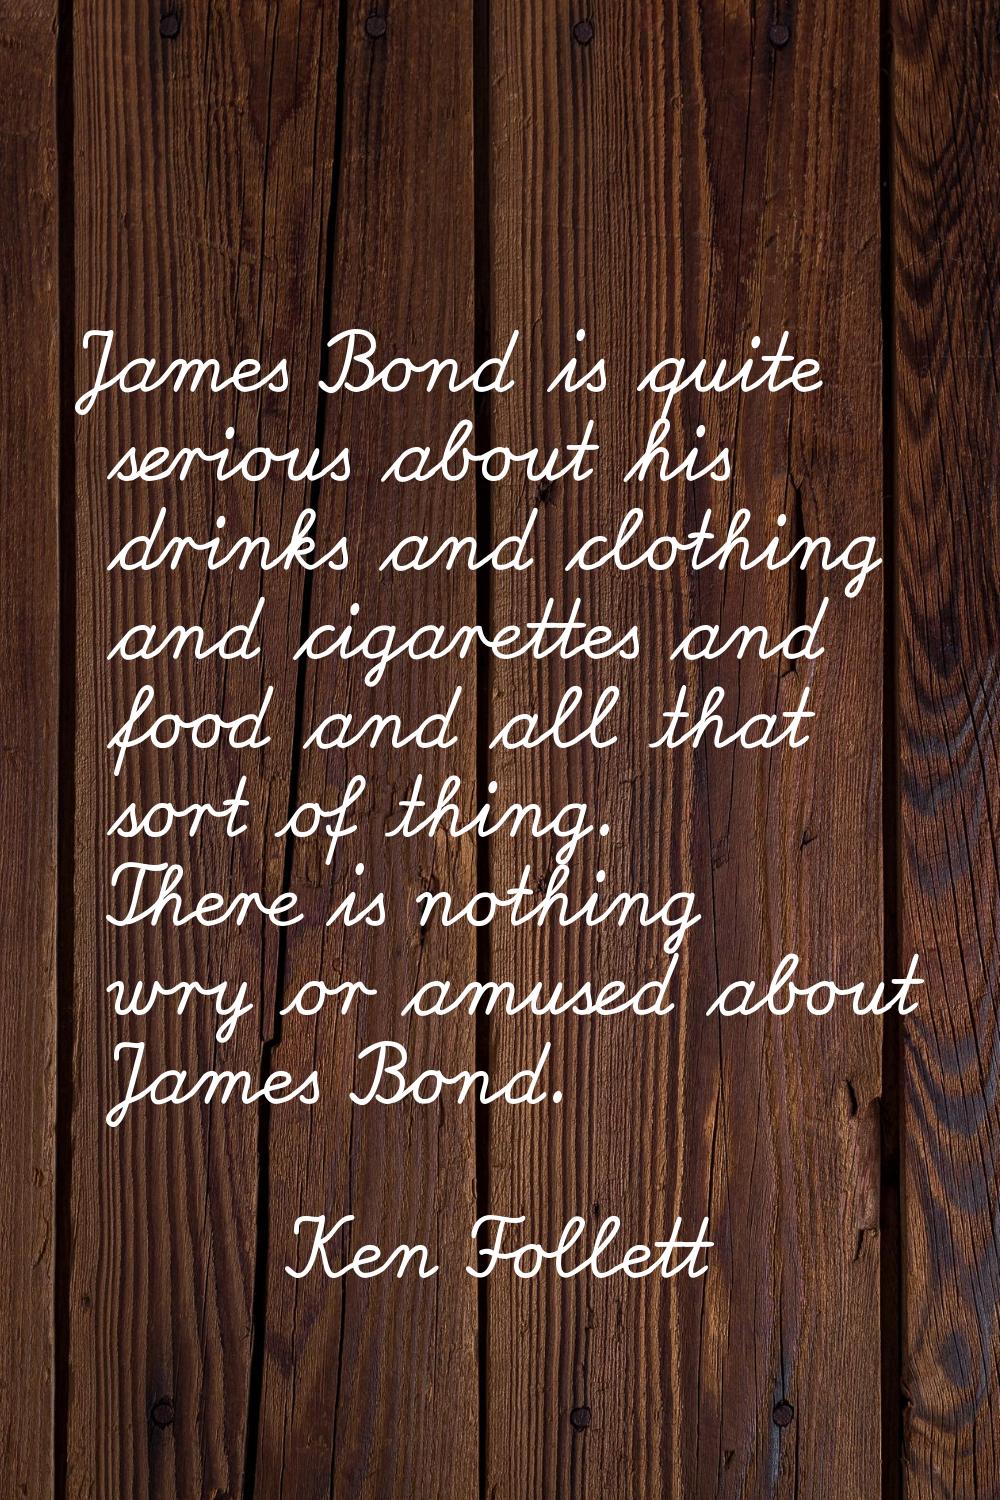 James Bond is quite serious about his drinks and clothing and cigarettes and food and all that sort